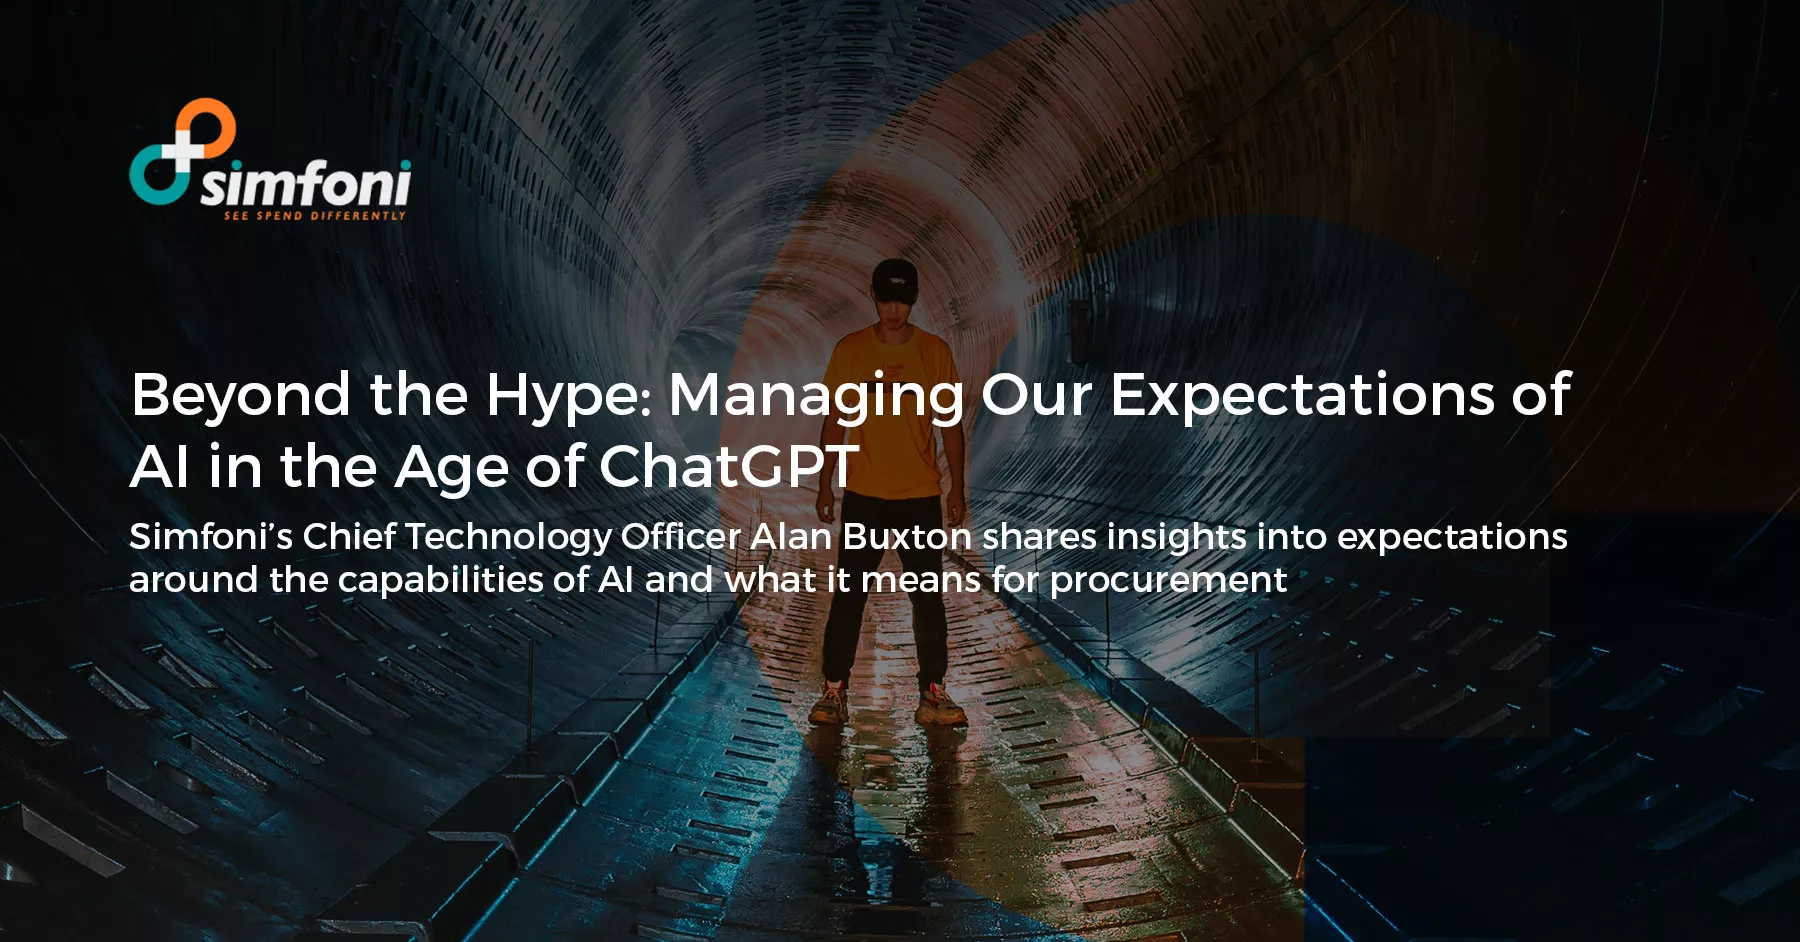 Beyond the Hype: Managing Our Expectations of AI in the Age of ChatGPT